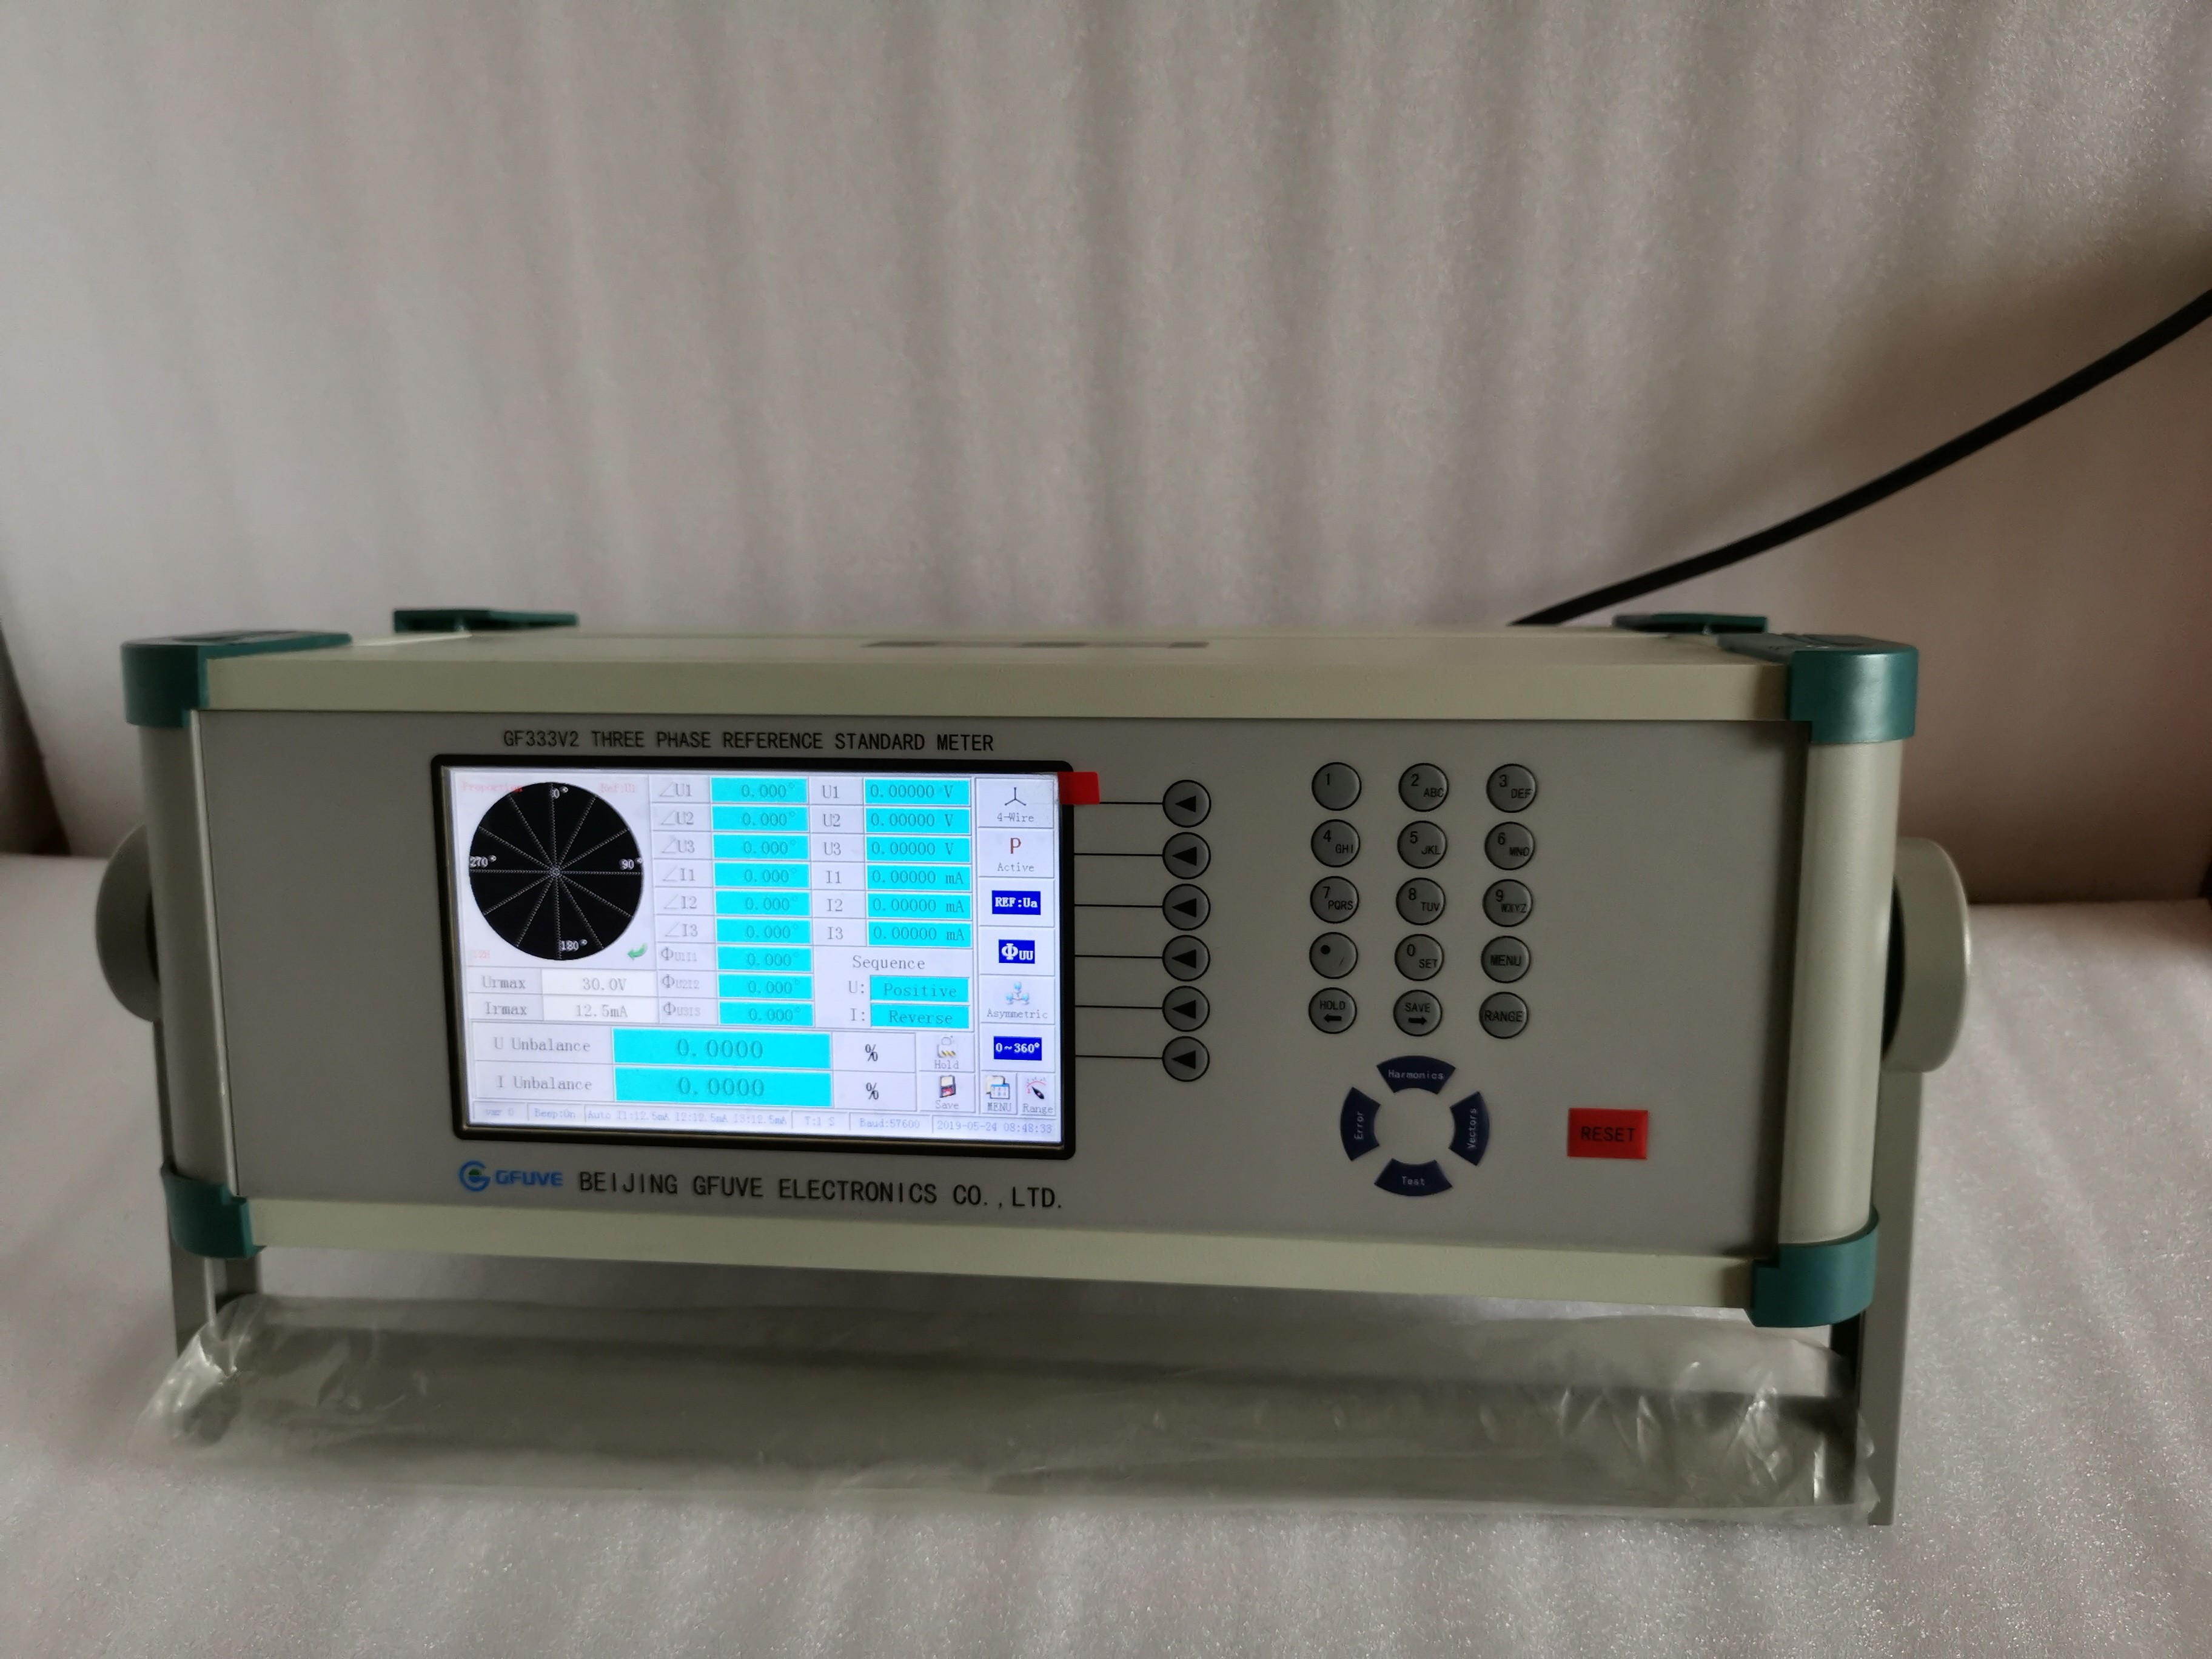 GFUVE GF332V2 High Harmonic Electronic Test Instruments Of GFUVE Three Phase Reference Meter